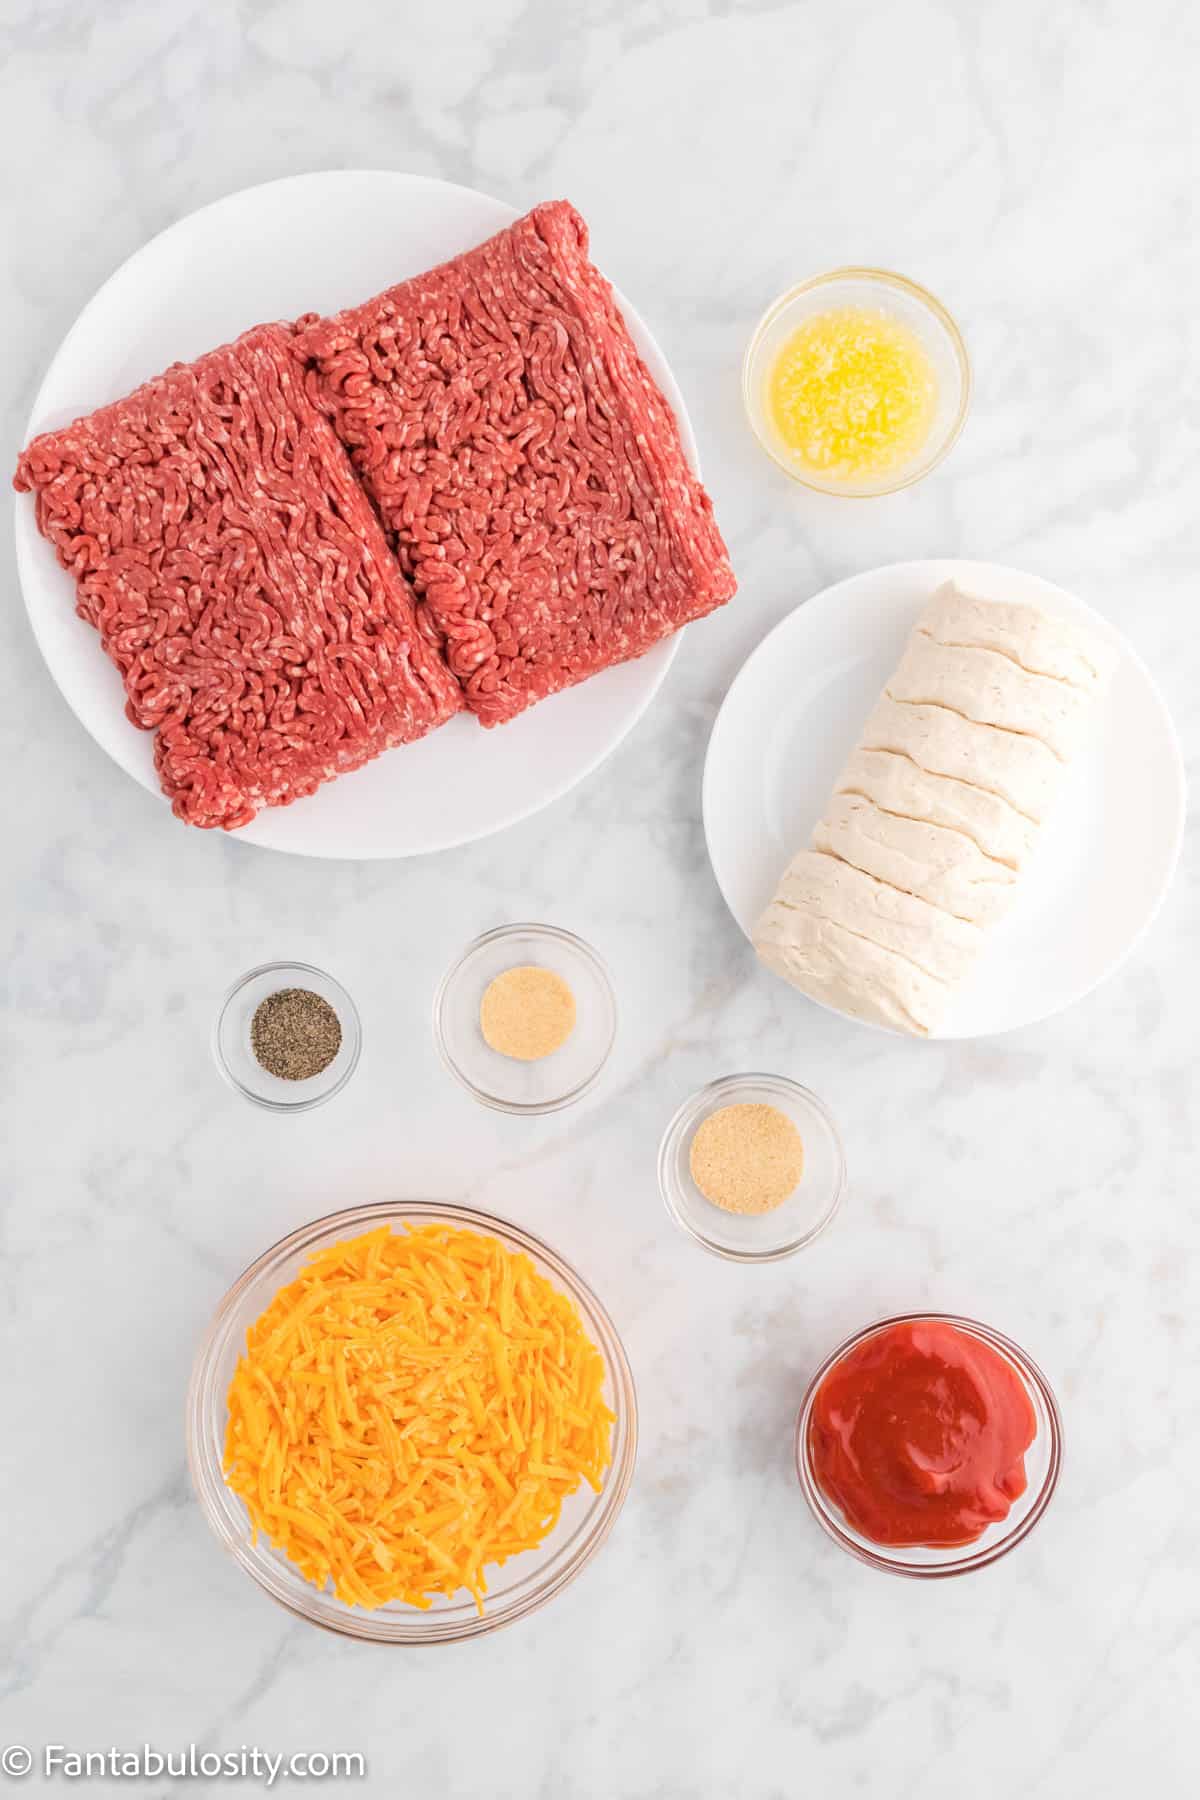 A picture of the ingredients you need to make a cheeseburger casserole.